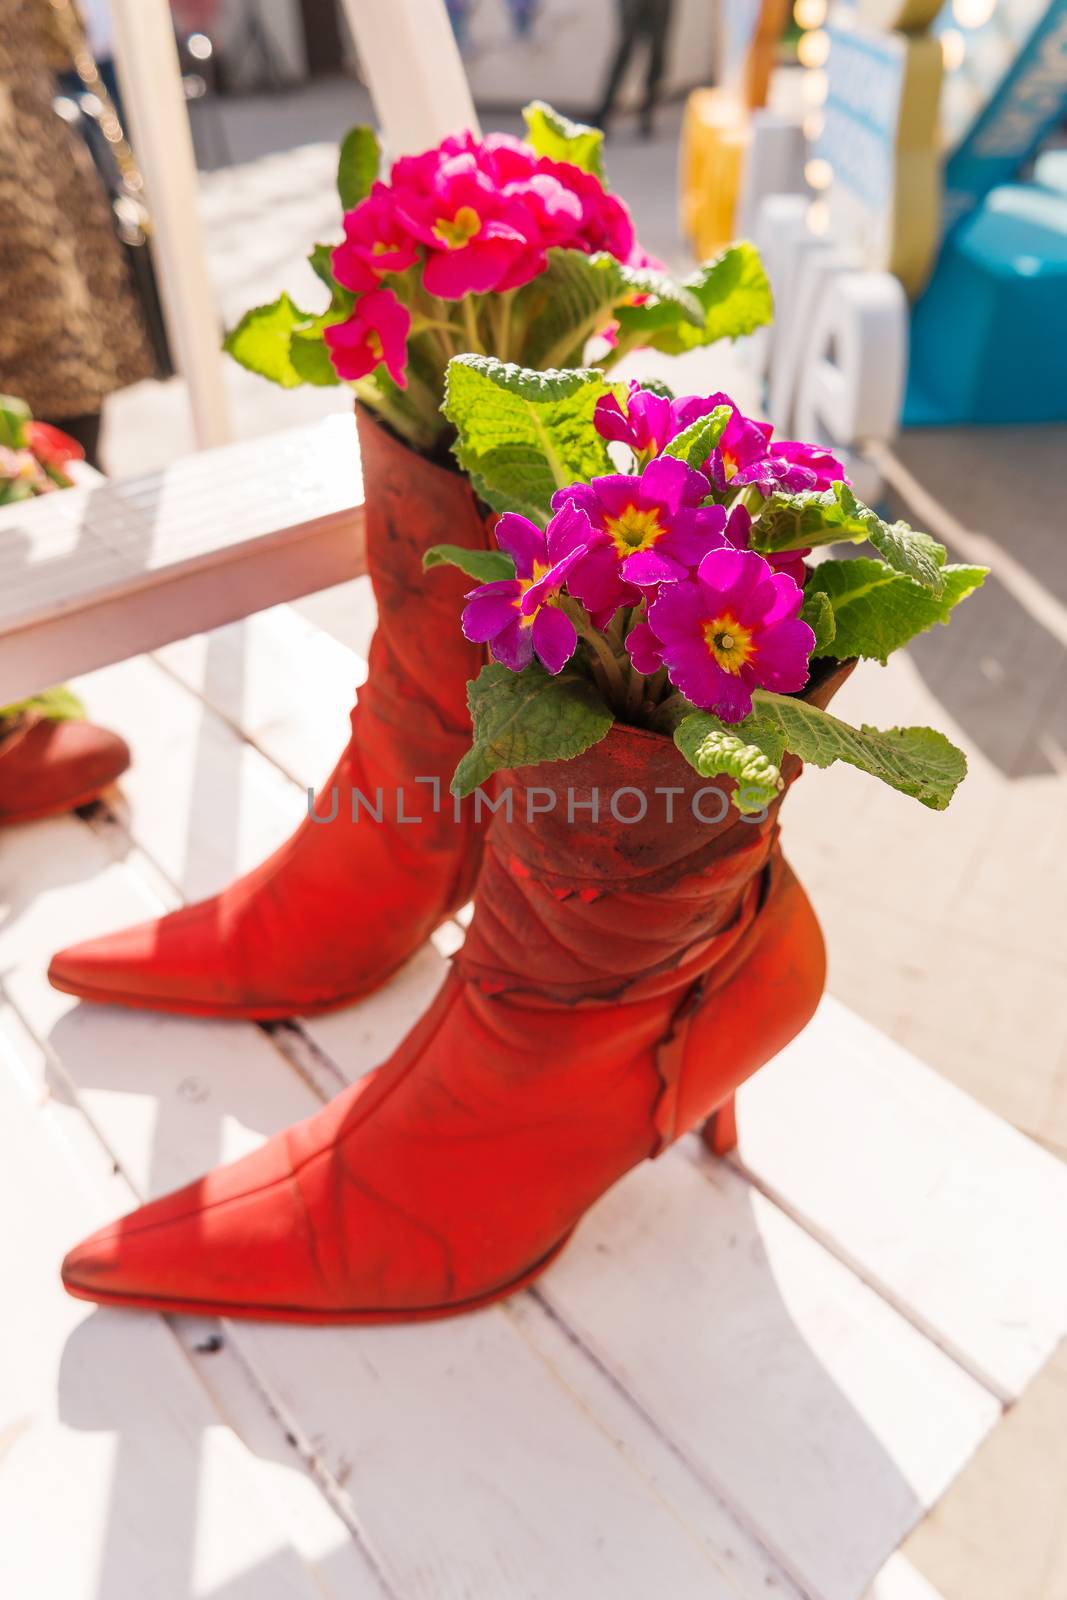 Funny street decorations - painted old boots with plants and flowers inside. Shoes used like flower pots. Moscow, Russia. by aksenovko